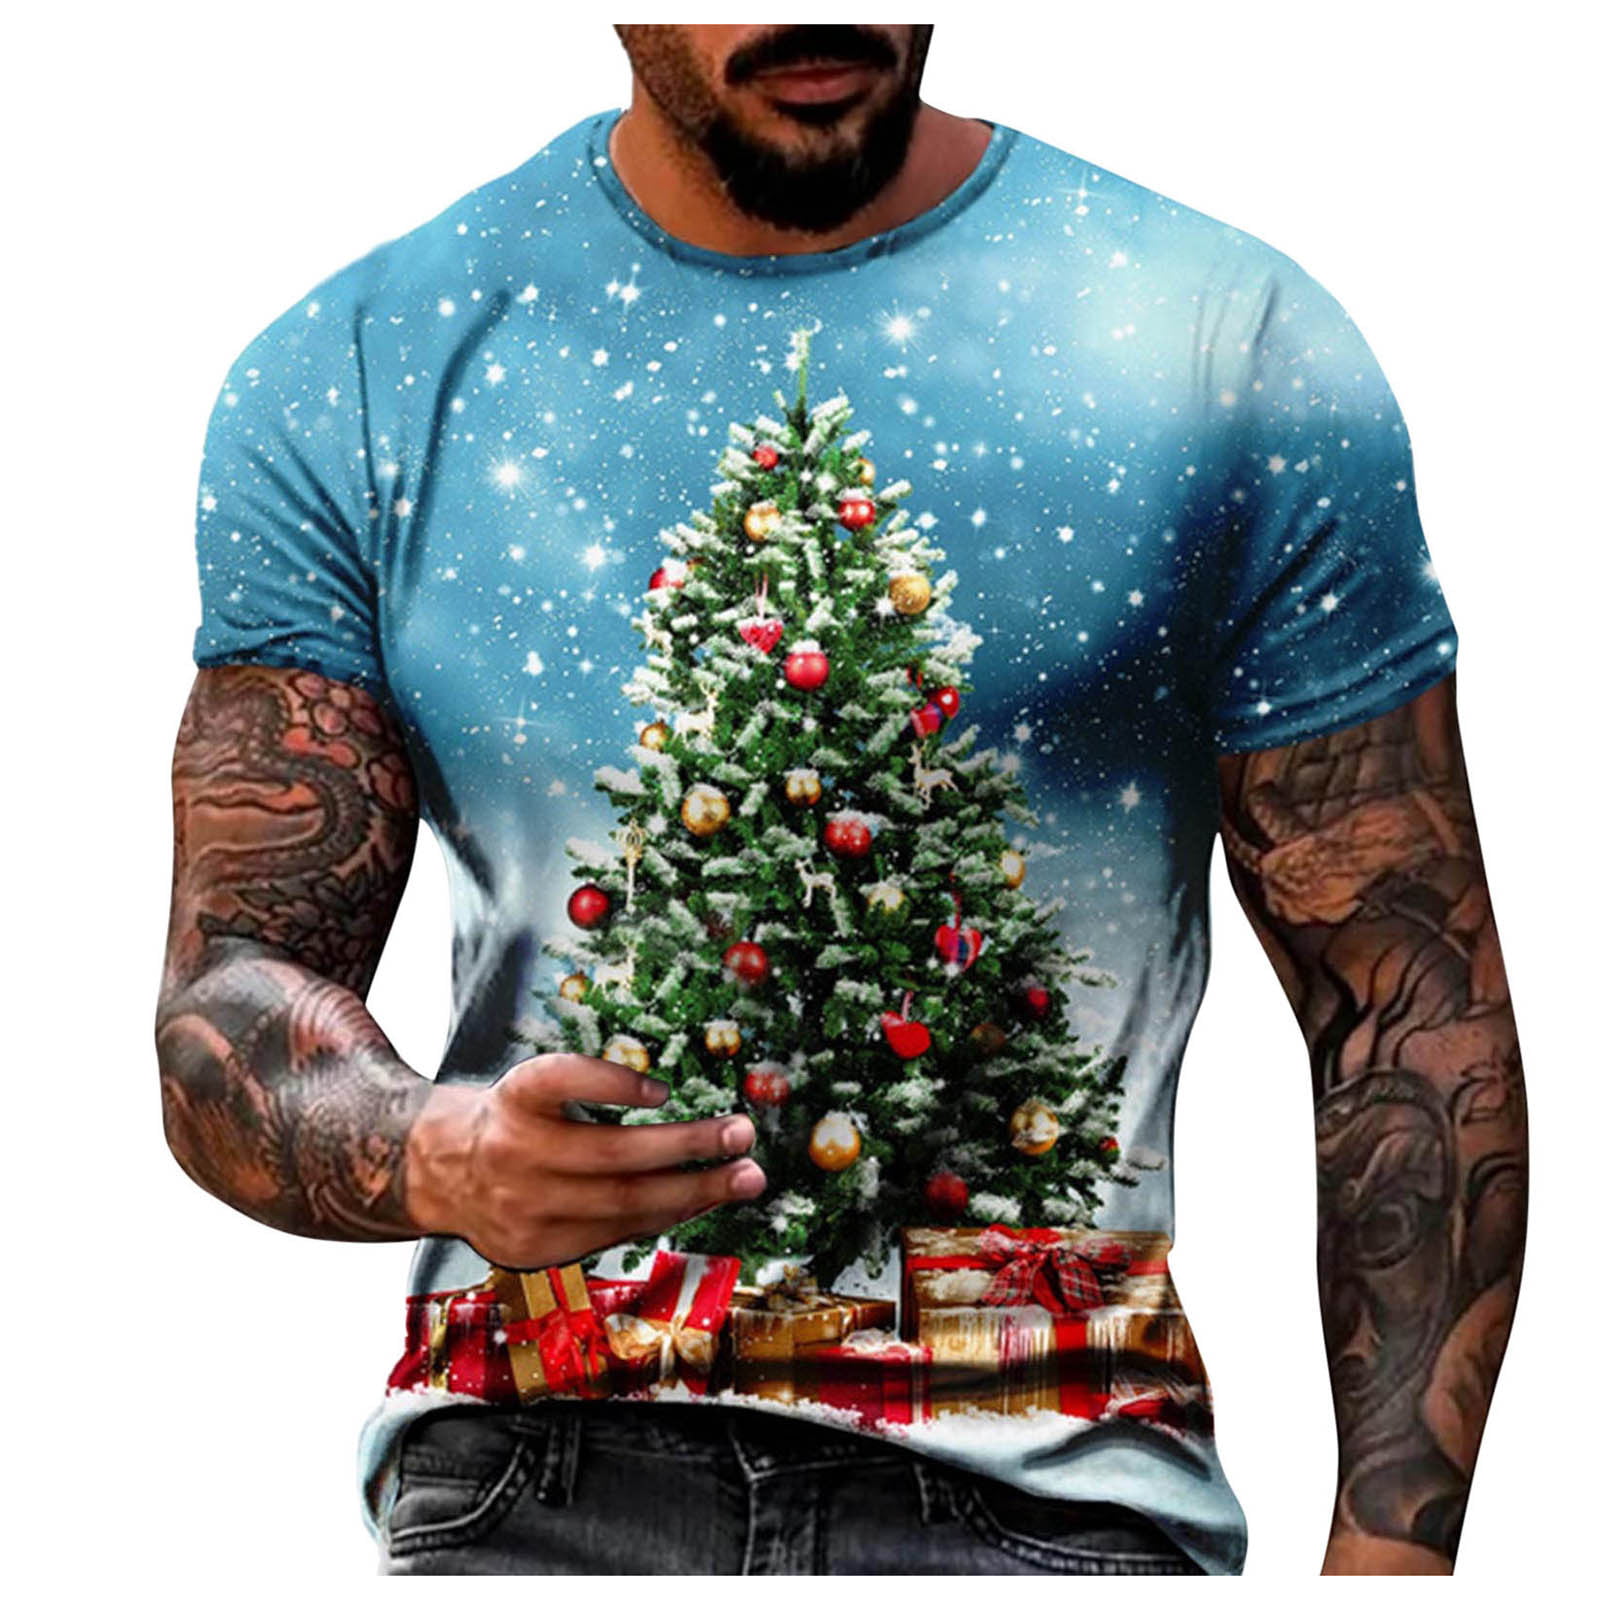 New OId Stock Various Sizes! Starbucks Christmas T-Shirt Home For The Holidays 